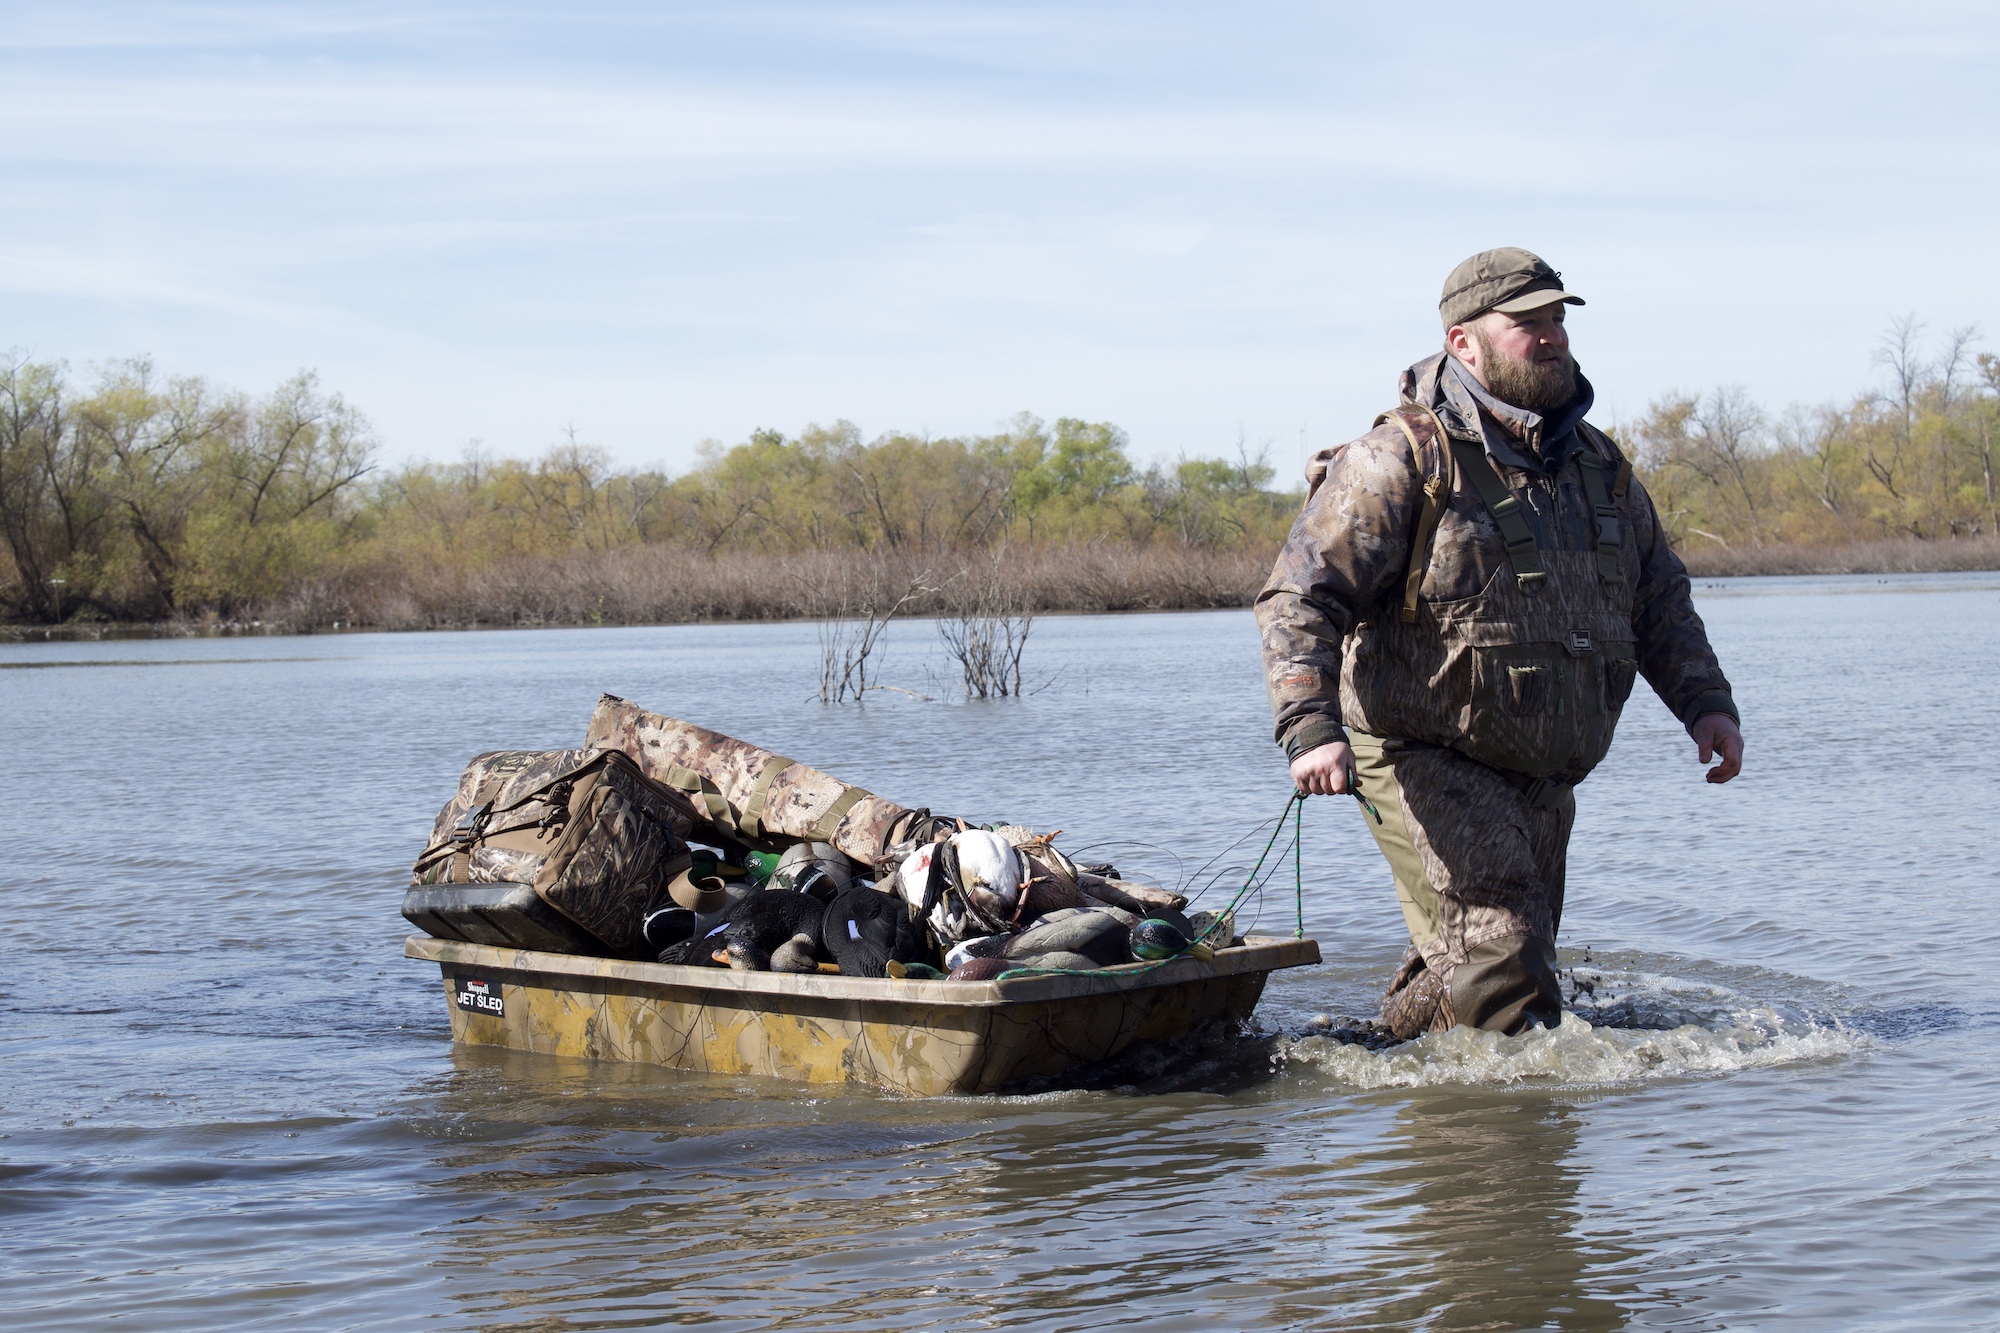 The Best Duck Hunting Waders